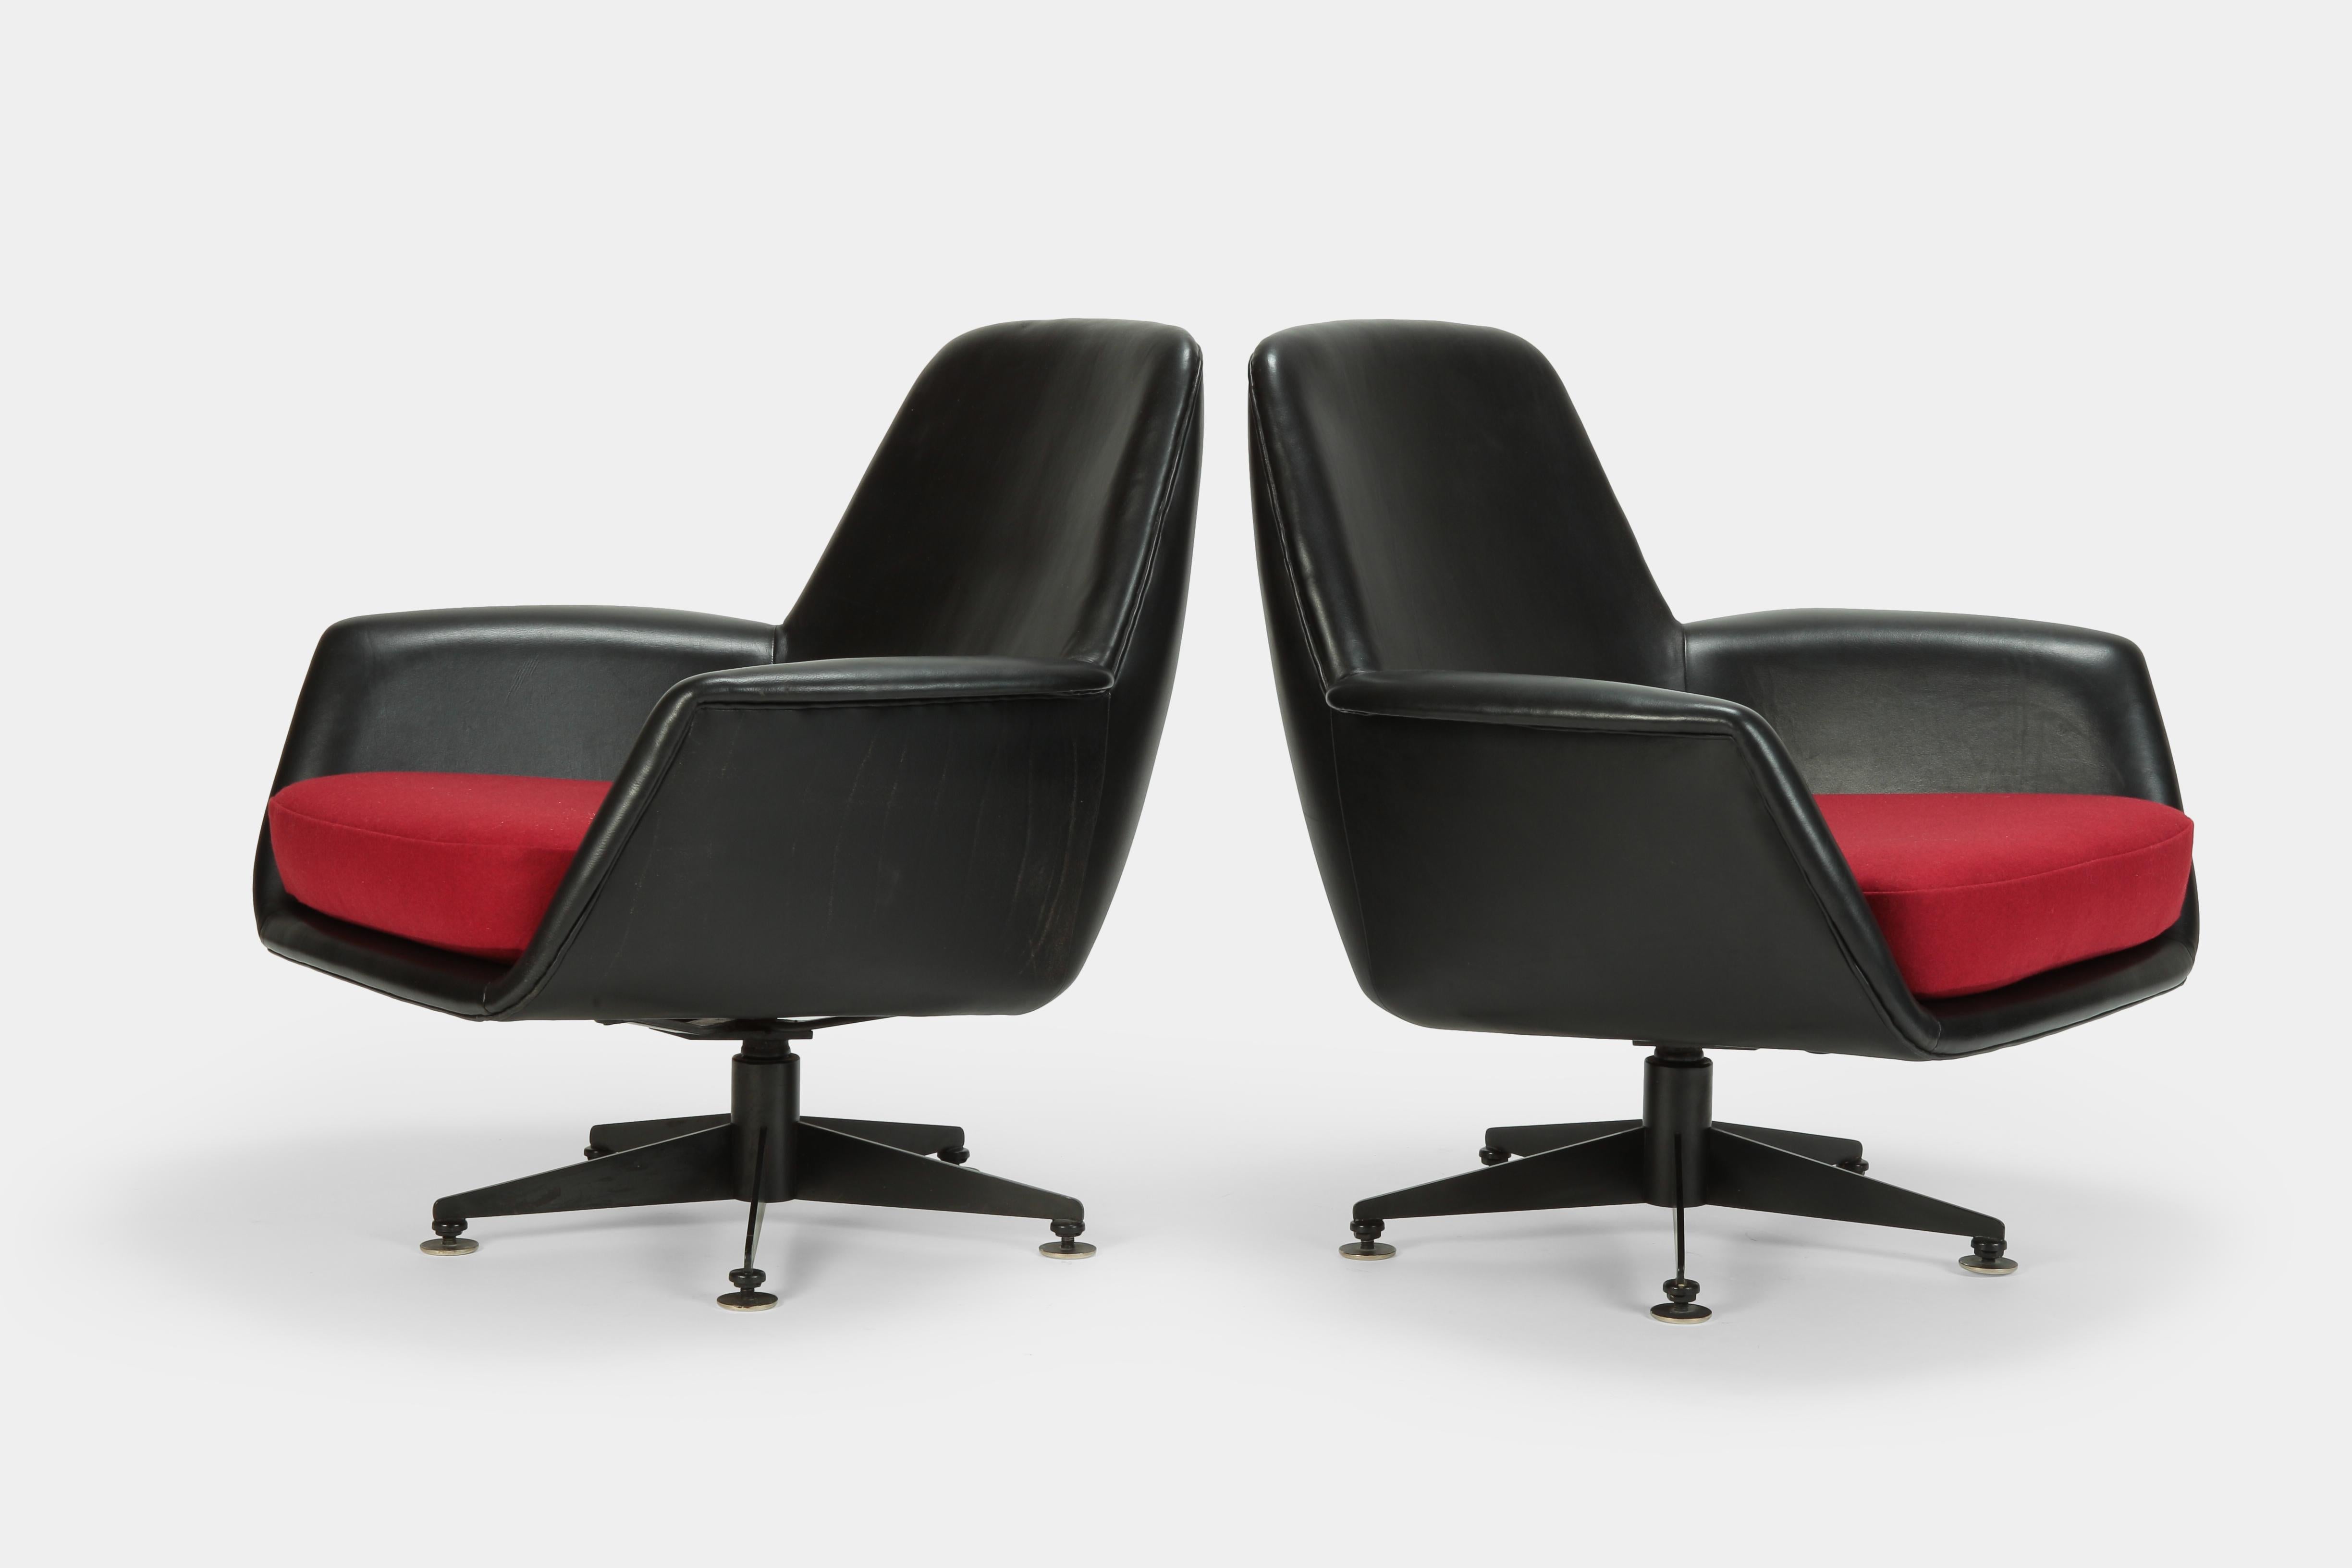 Two elegant lounge chairs manufactured by DEM in the 1960s in Switzerland. The shells are covered with fine, black leather and the cushions are also newly covered with a red lovely flannel fabric.